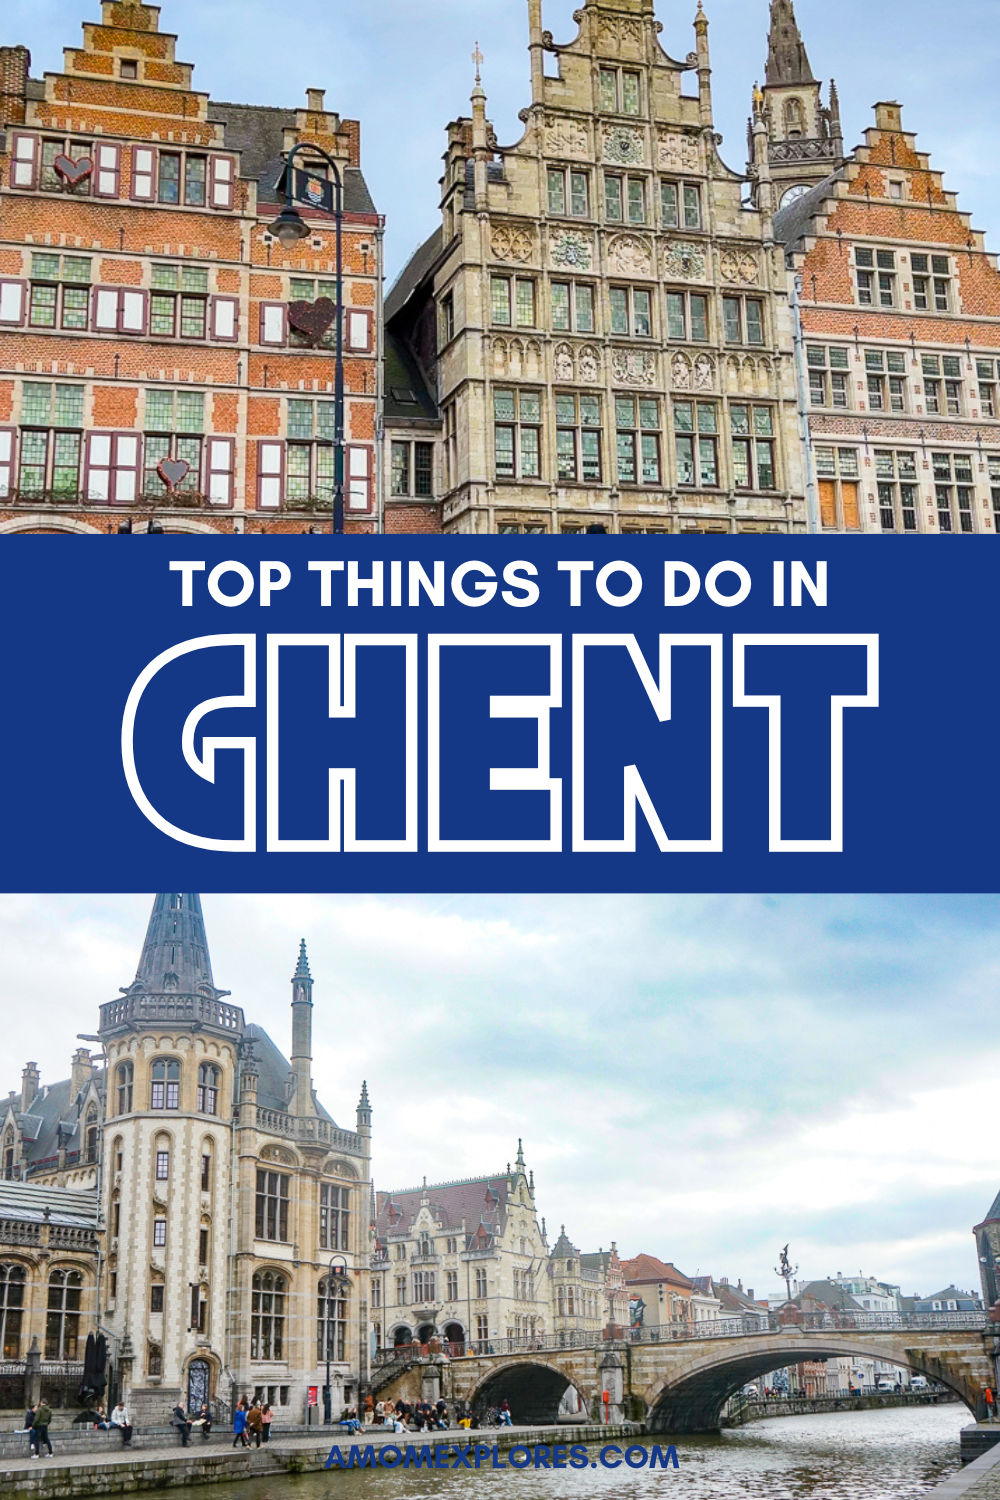 TOP THINGS TO DO IN Ghent BELGIUM.png